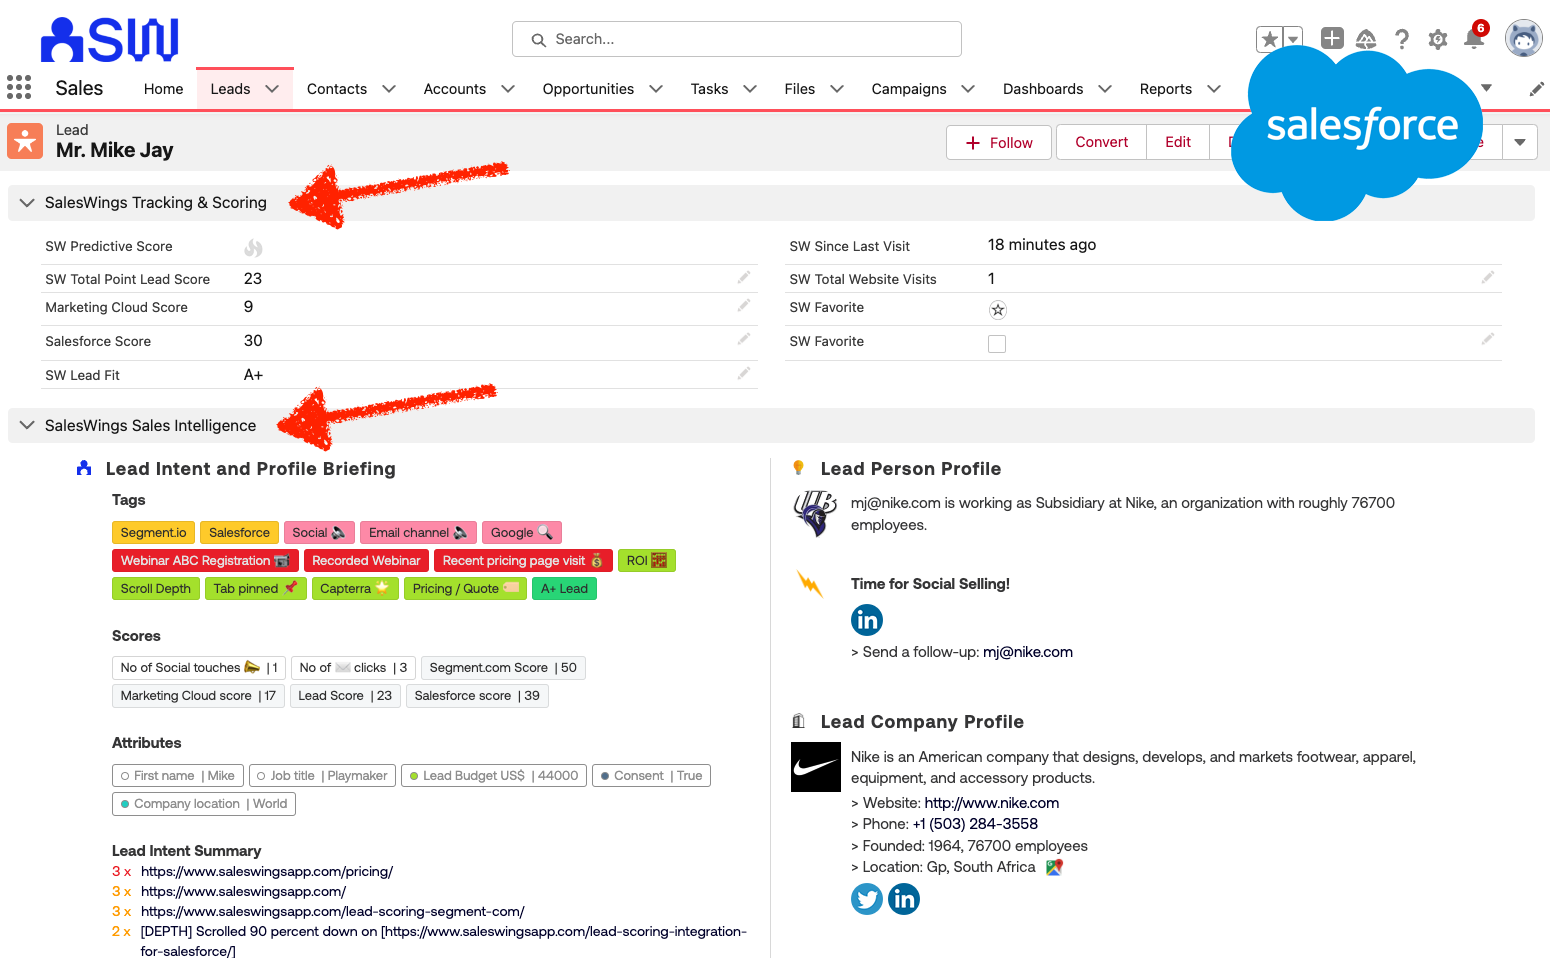 Example of sales insights view for sales reps inside Salesforce (also available for other CRM systems)